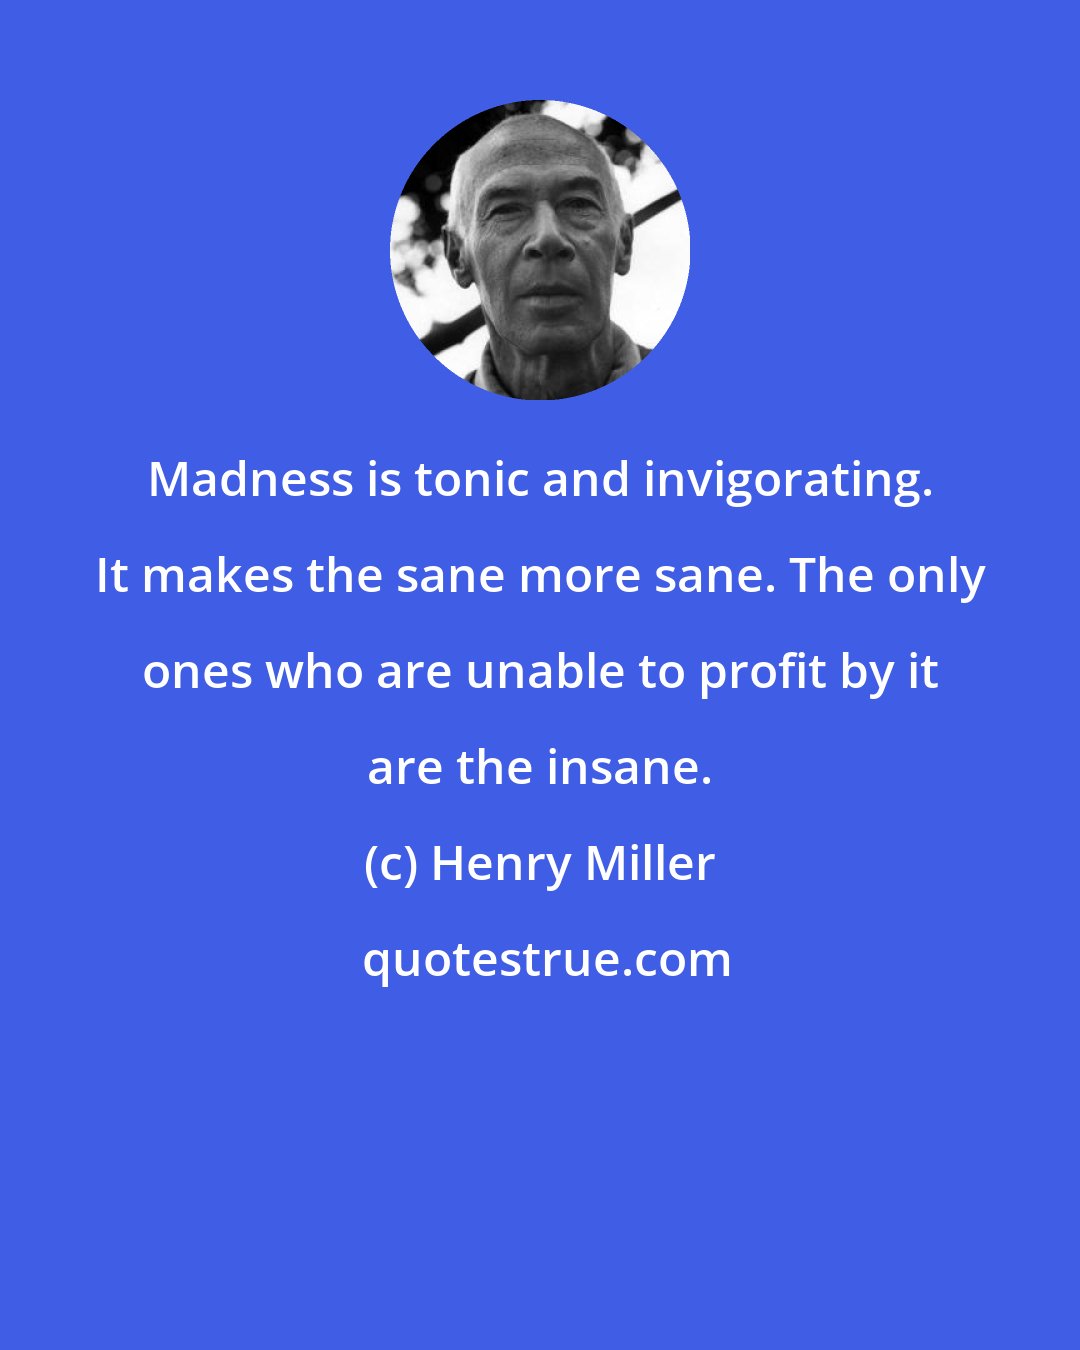 Henry Miller: Madness is tonic and invigorating. It makes the sane more sane. The only ones who are unable to profit by it are the insane.